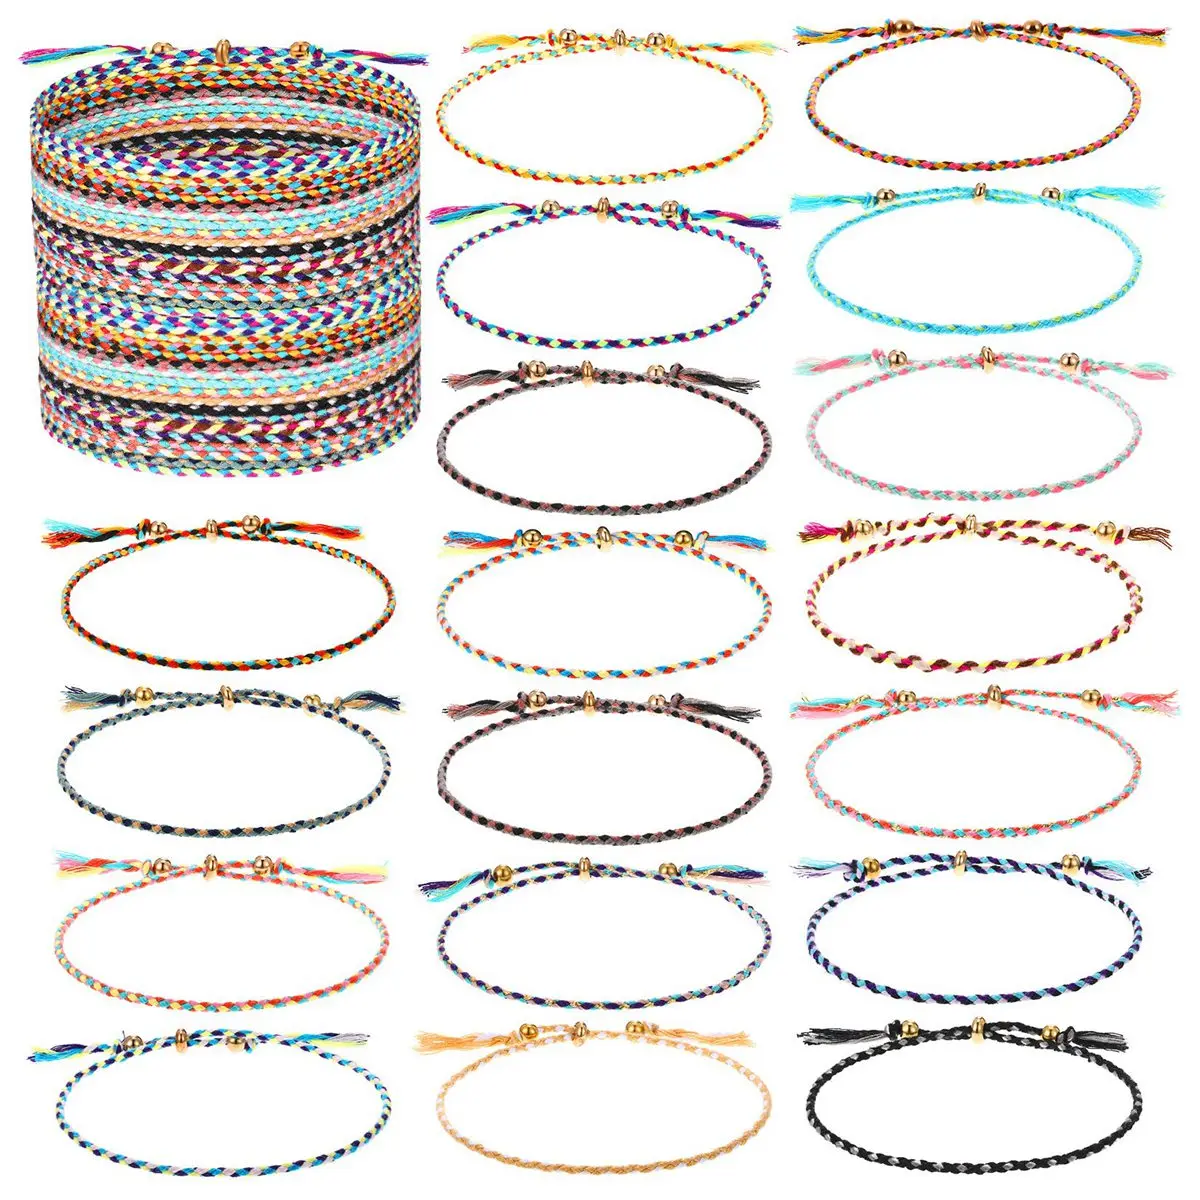 

50Pcs Friendship Braided Bracelet Adjustable Colorful Bracelet Colorful Wrist Cord Anklets Jewelry for Women Teen Girls